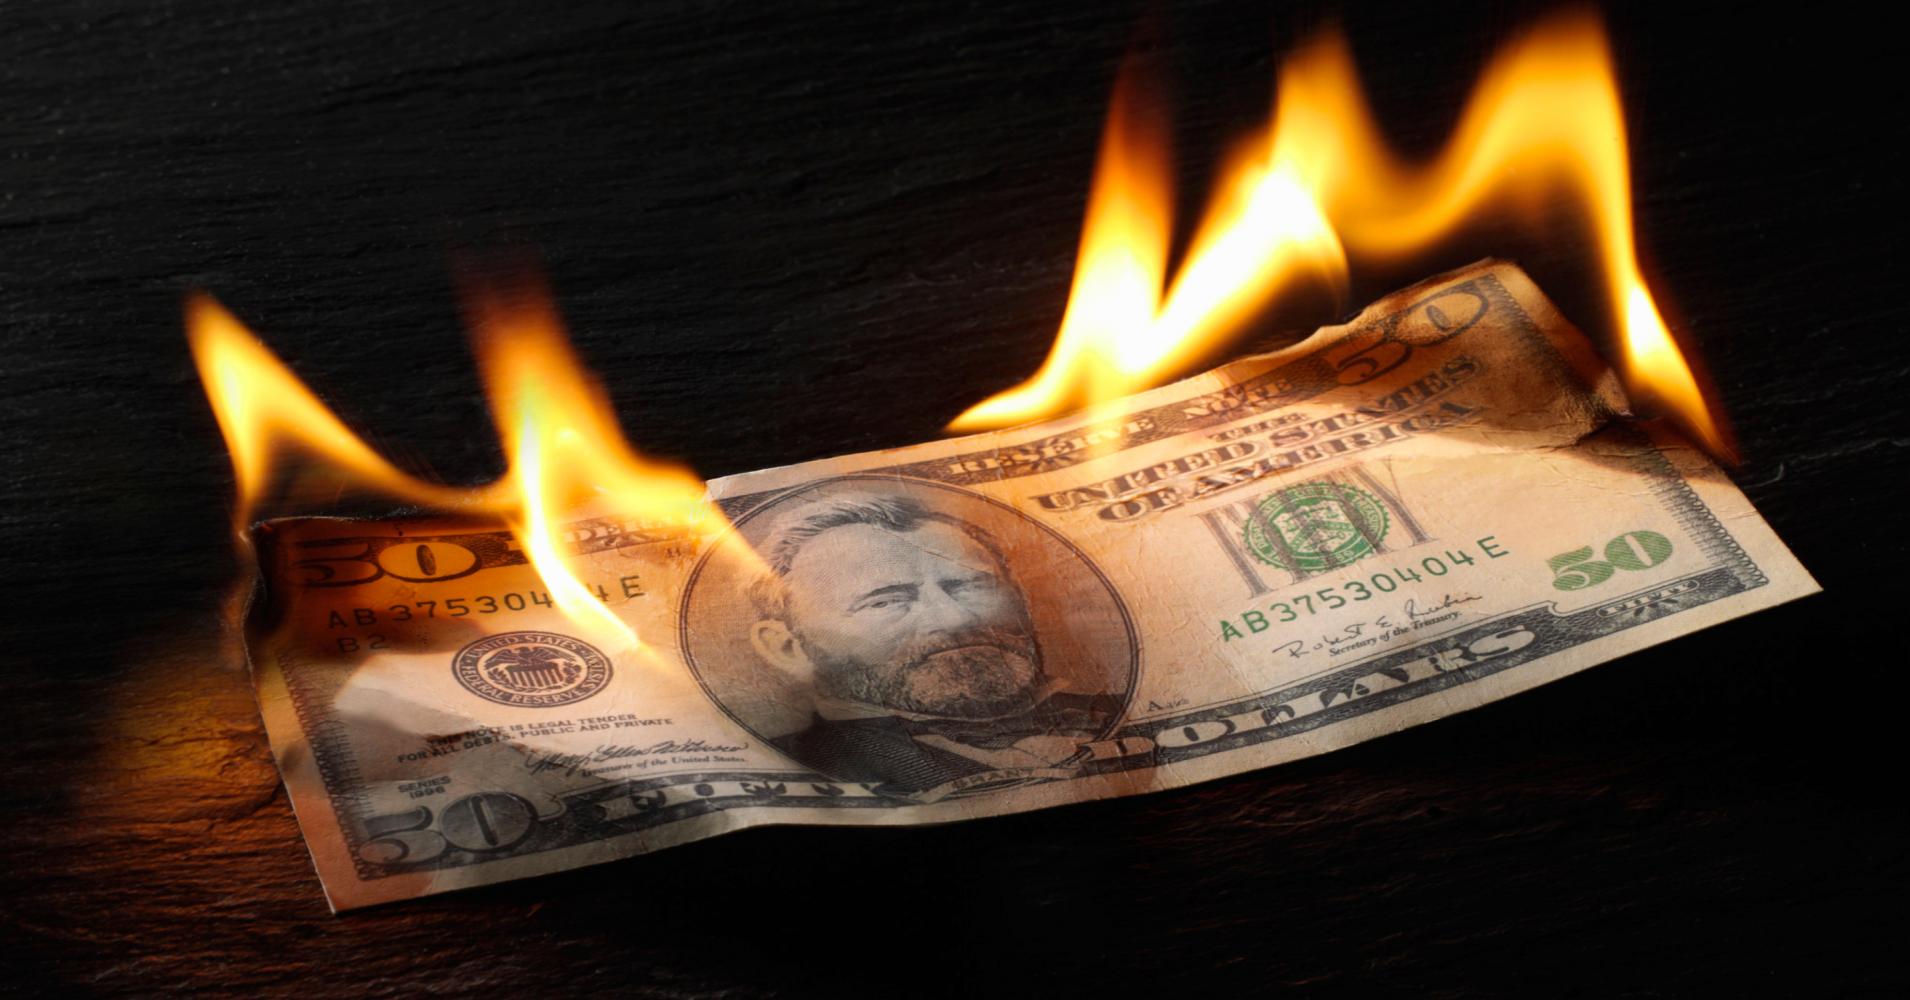 USA US dollar note currency burning